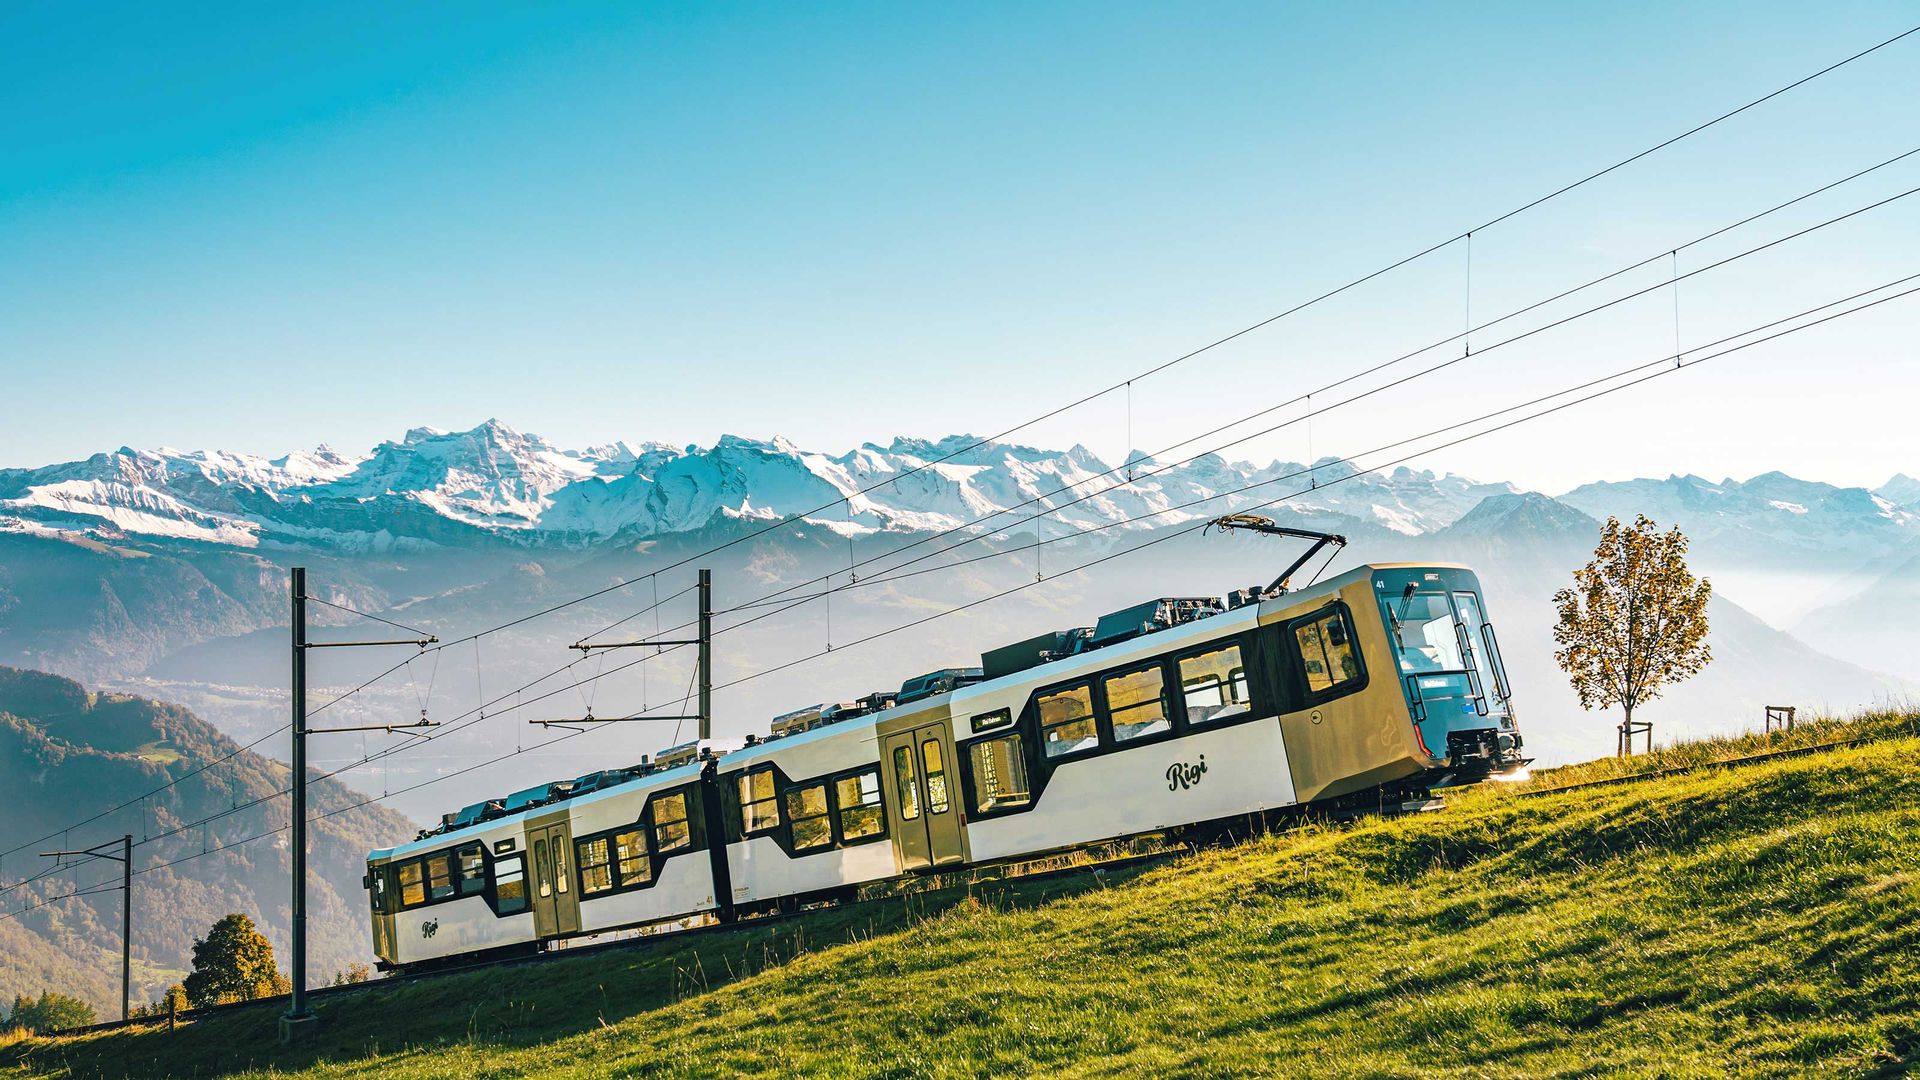 The rigi train traveling through a scenic mountain landscape on a clear day.